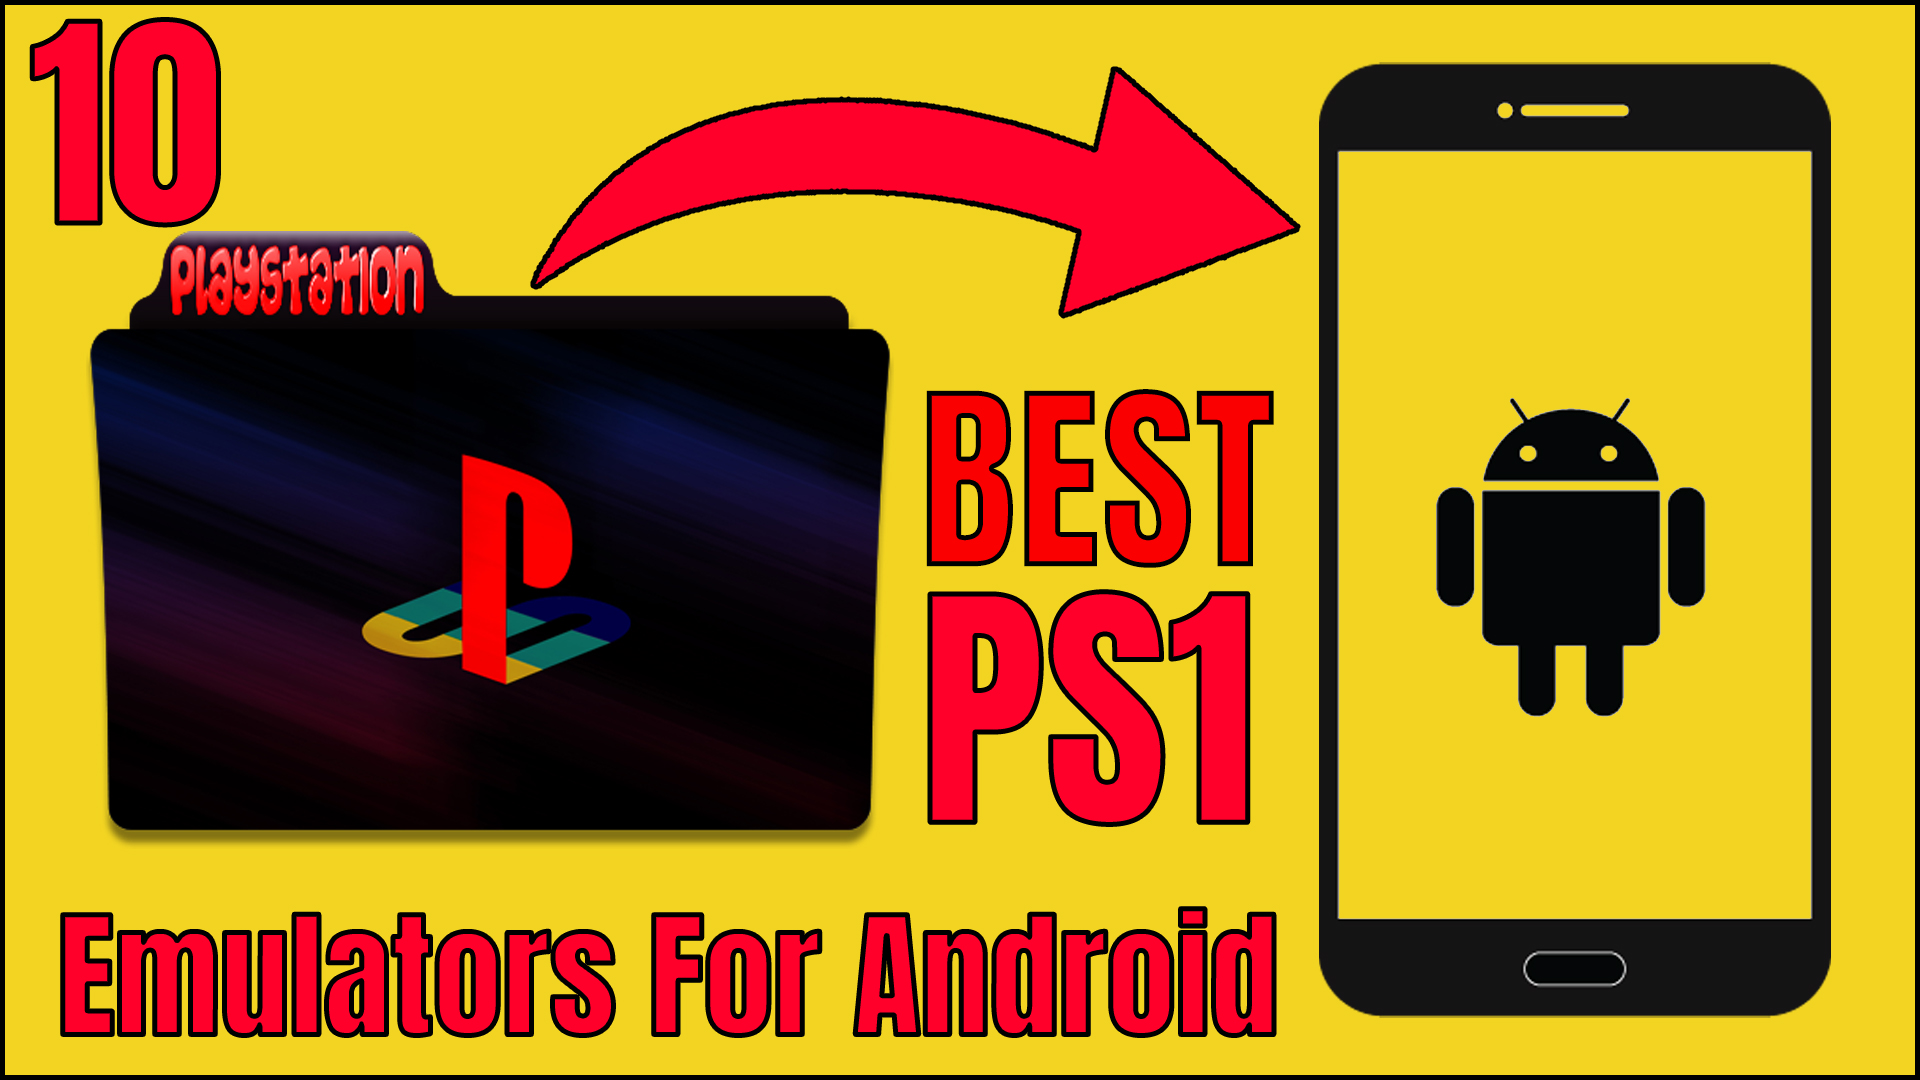 Best PS1 Emulators For Android